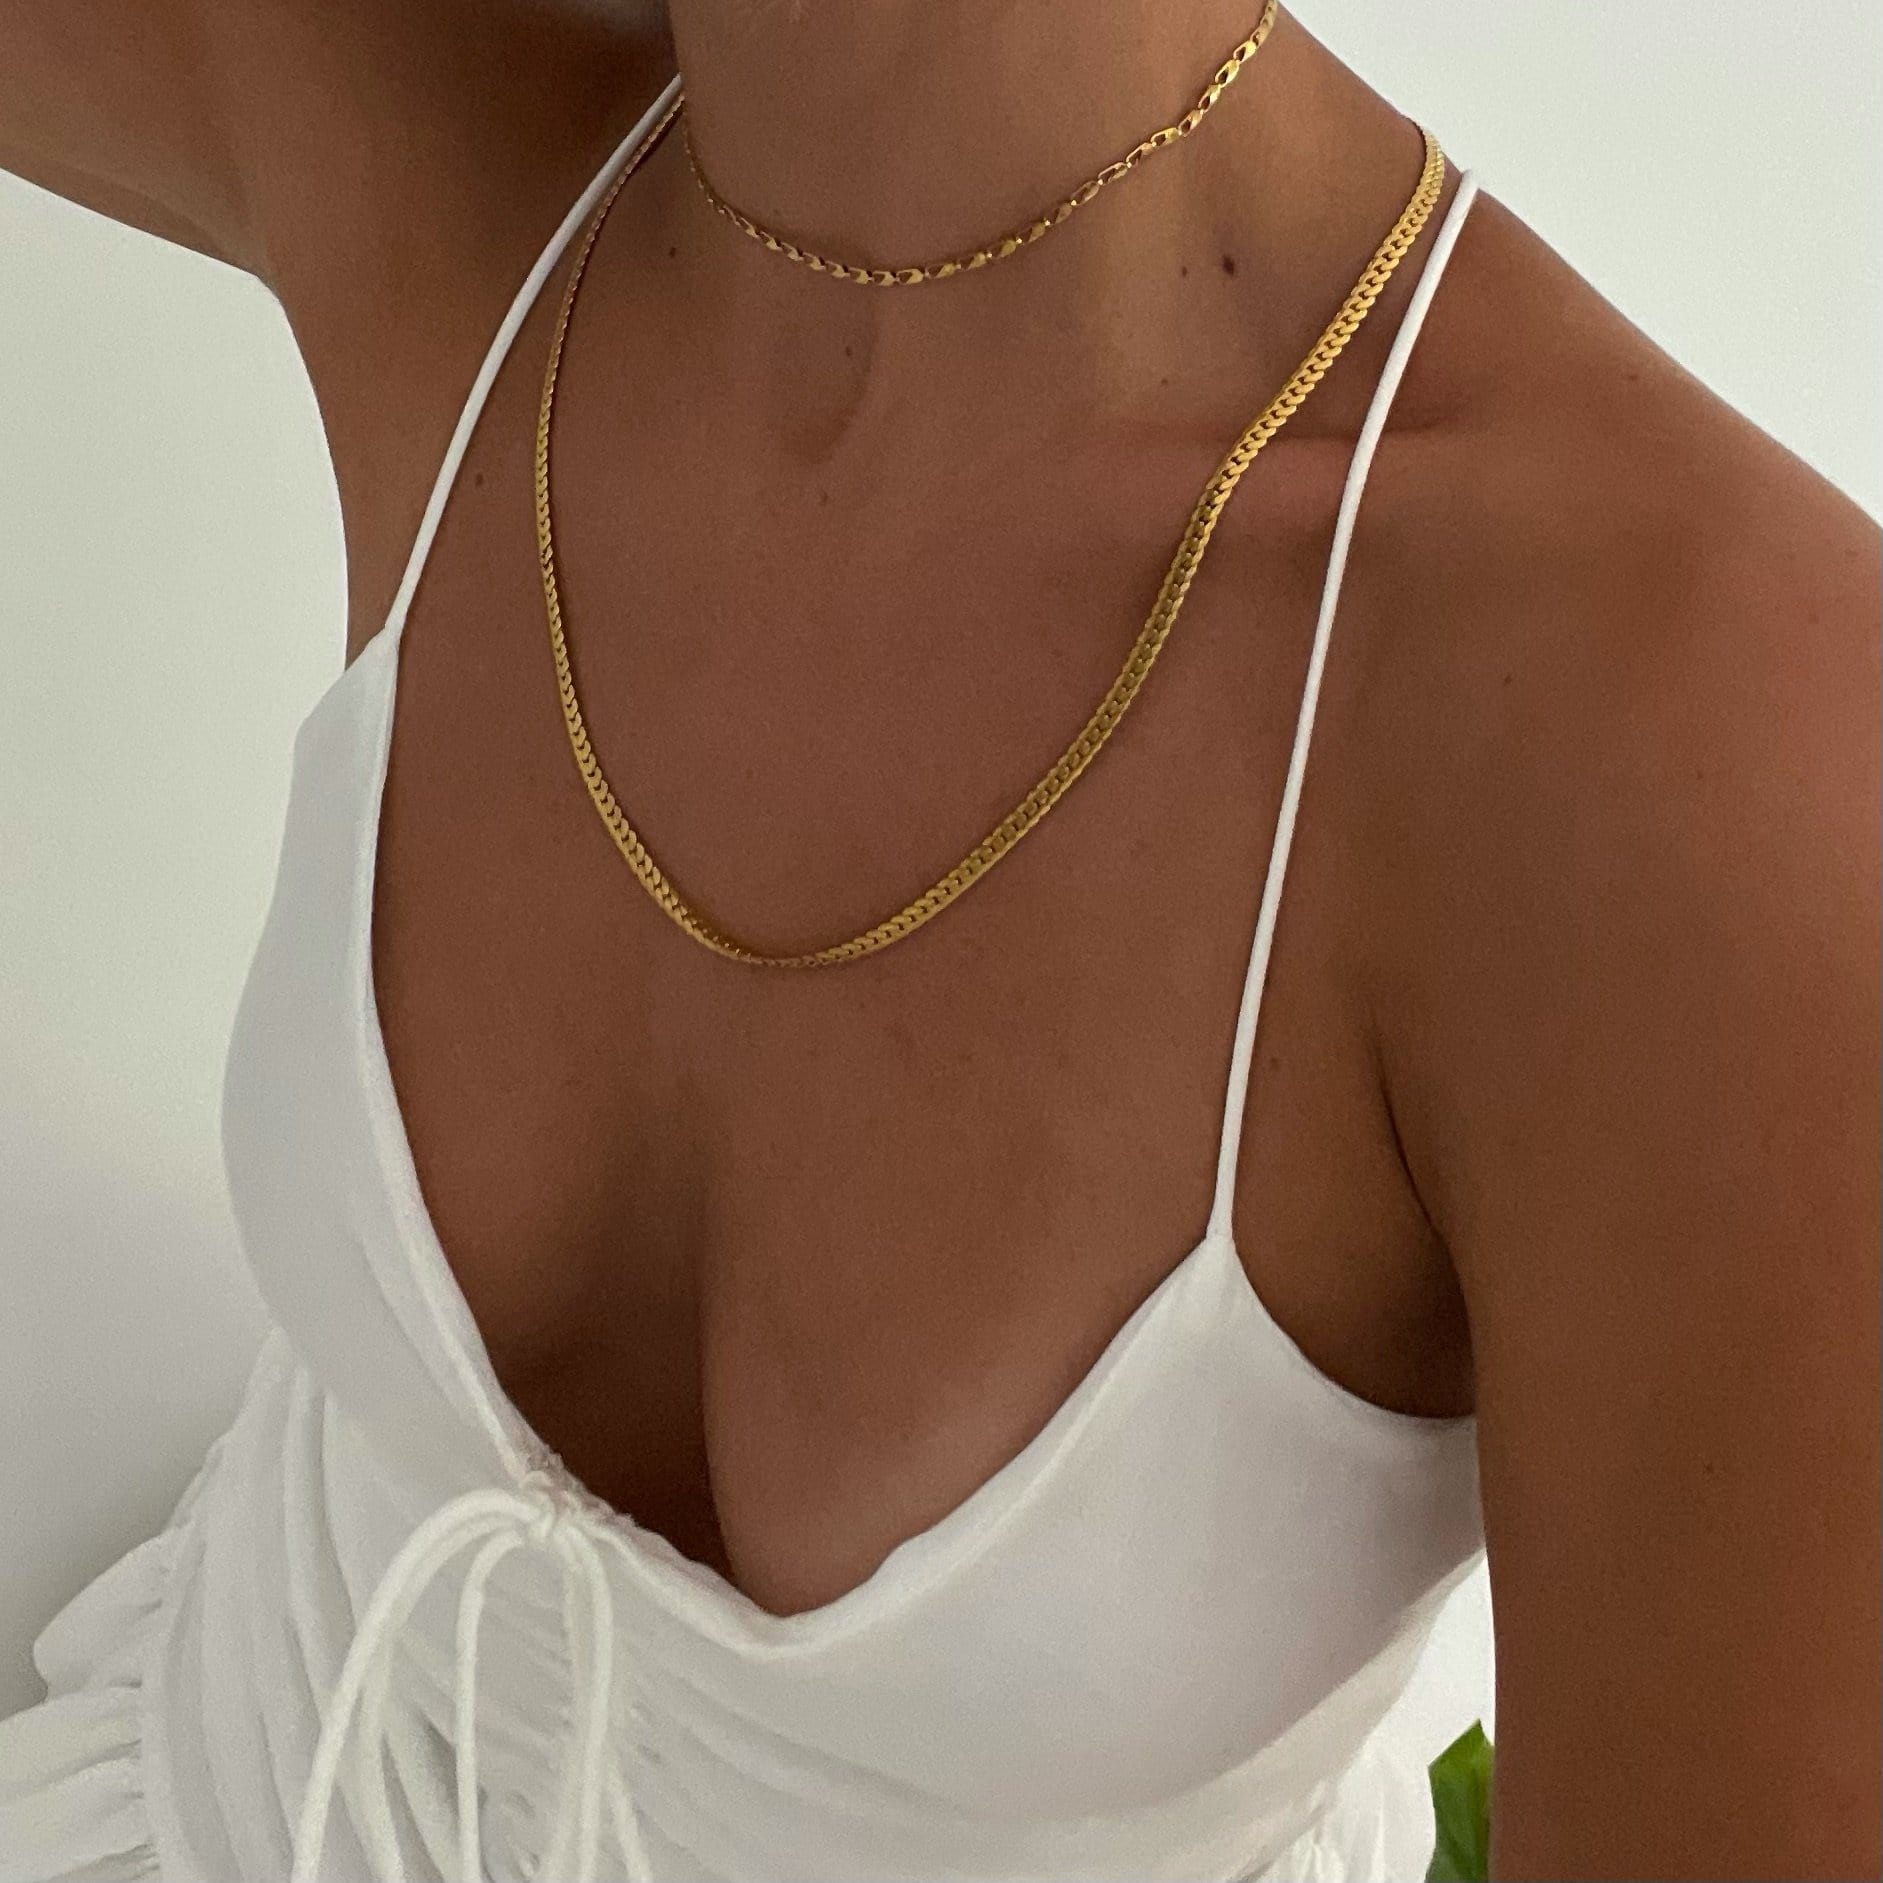 Ellie Vail - Emery Dainty Choker Chain Necklace